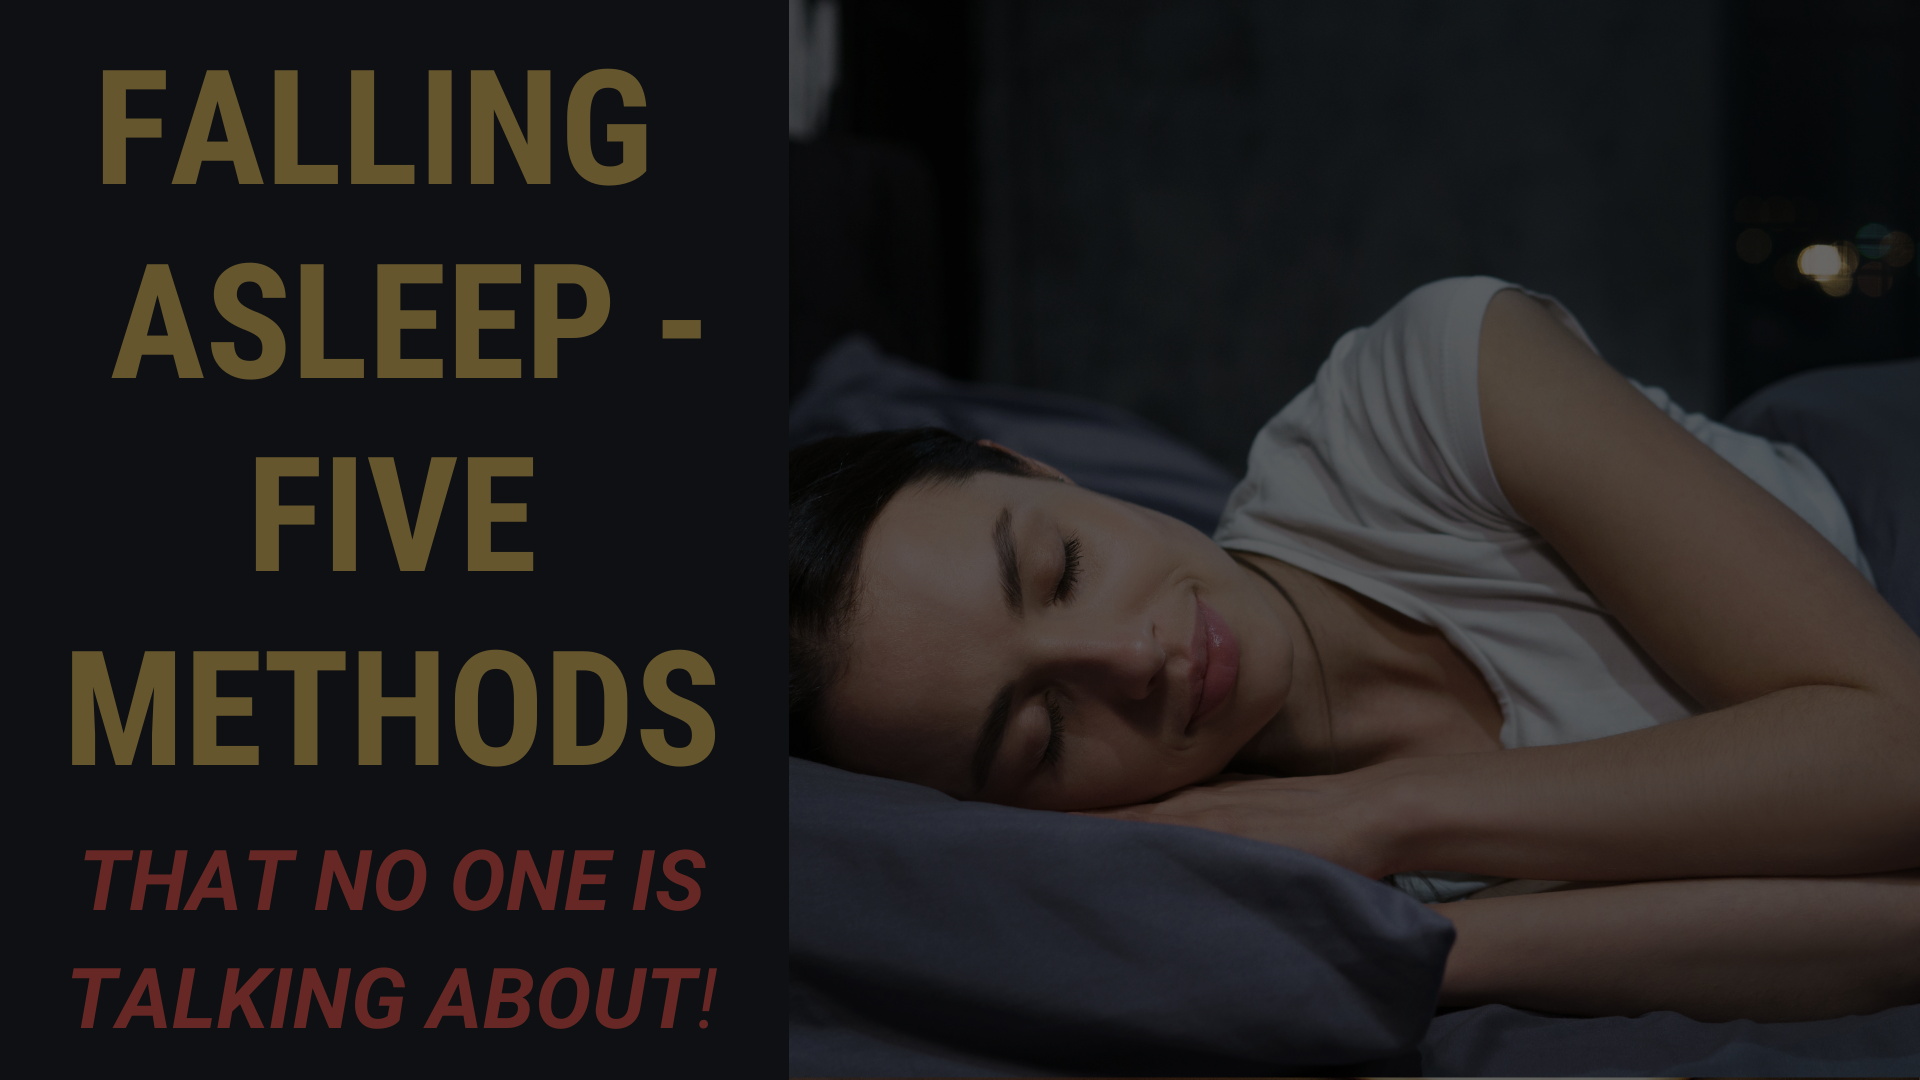 How To Fall Asleep - 5 Methods No One Is Talking About